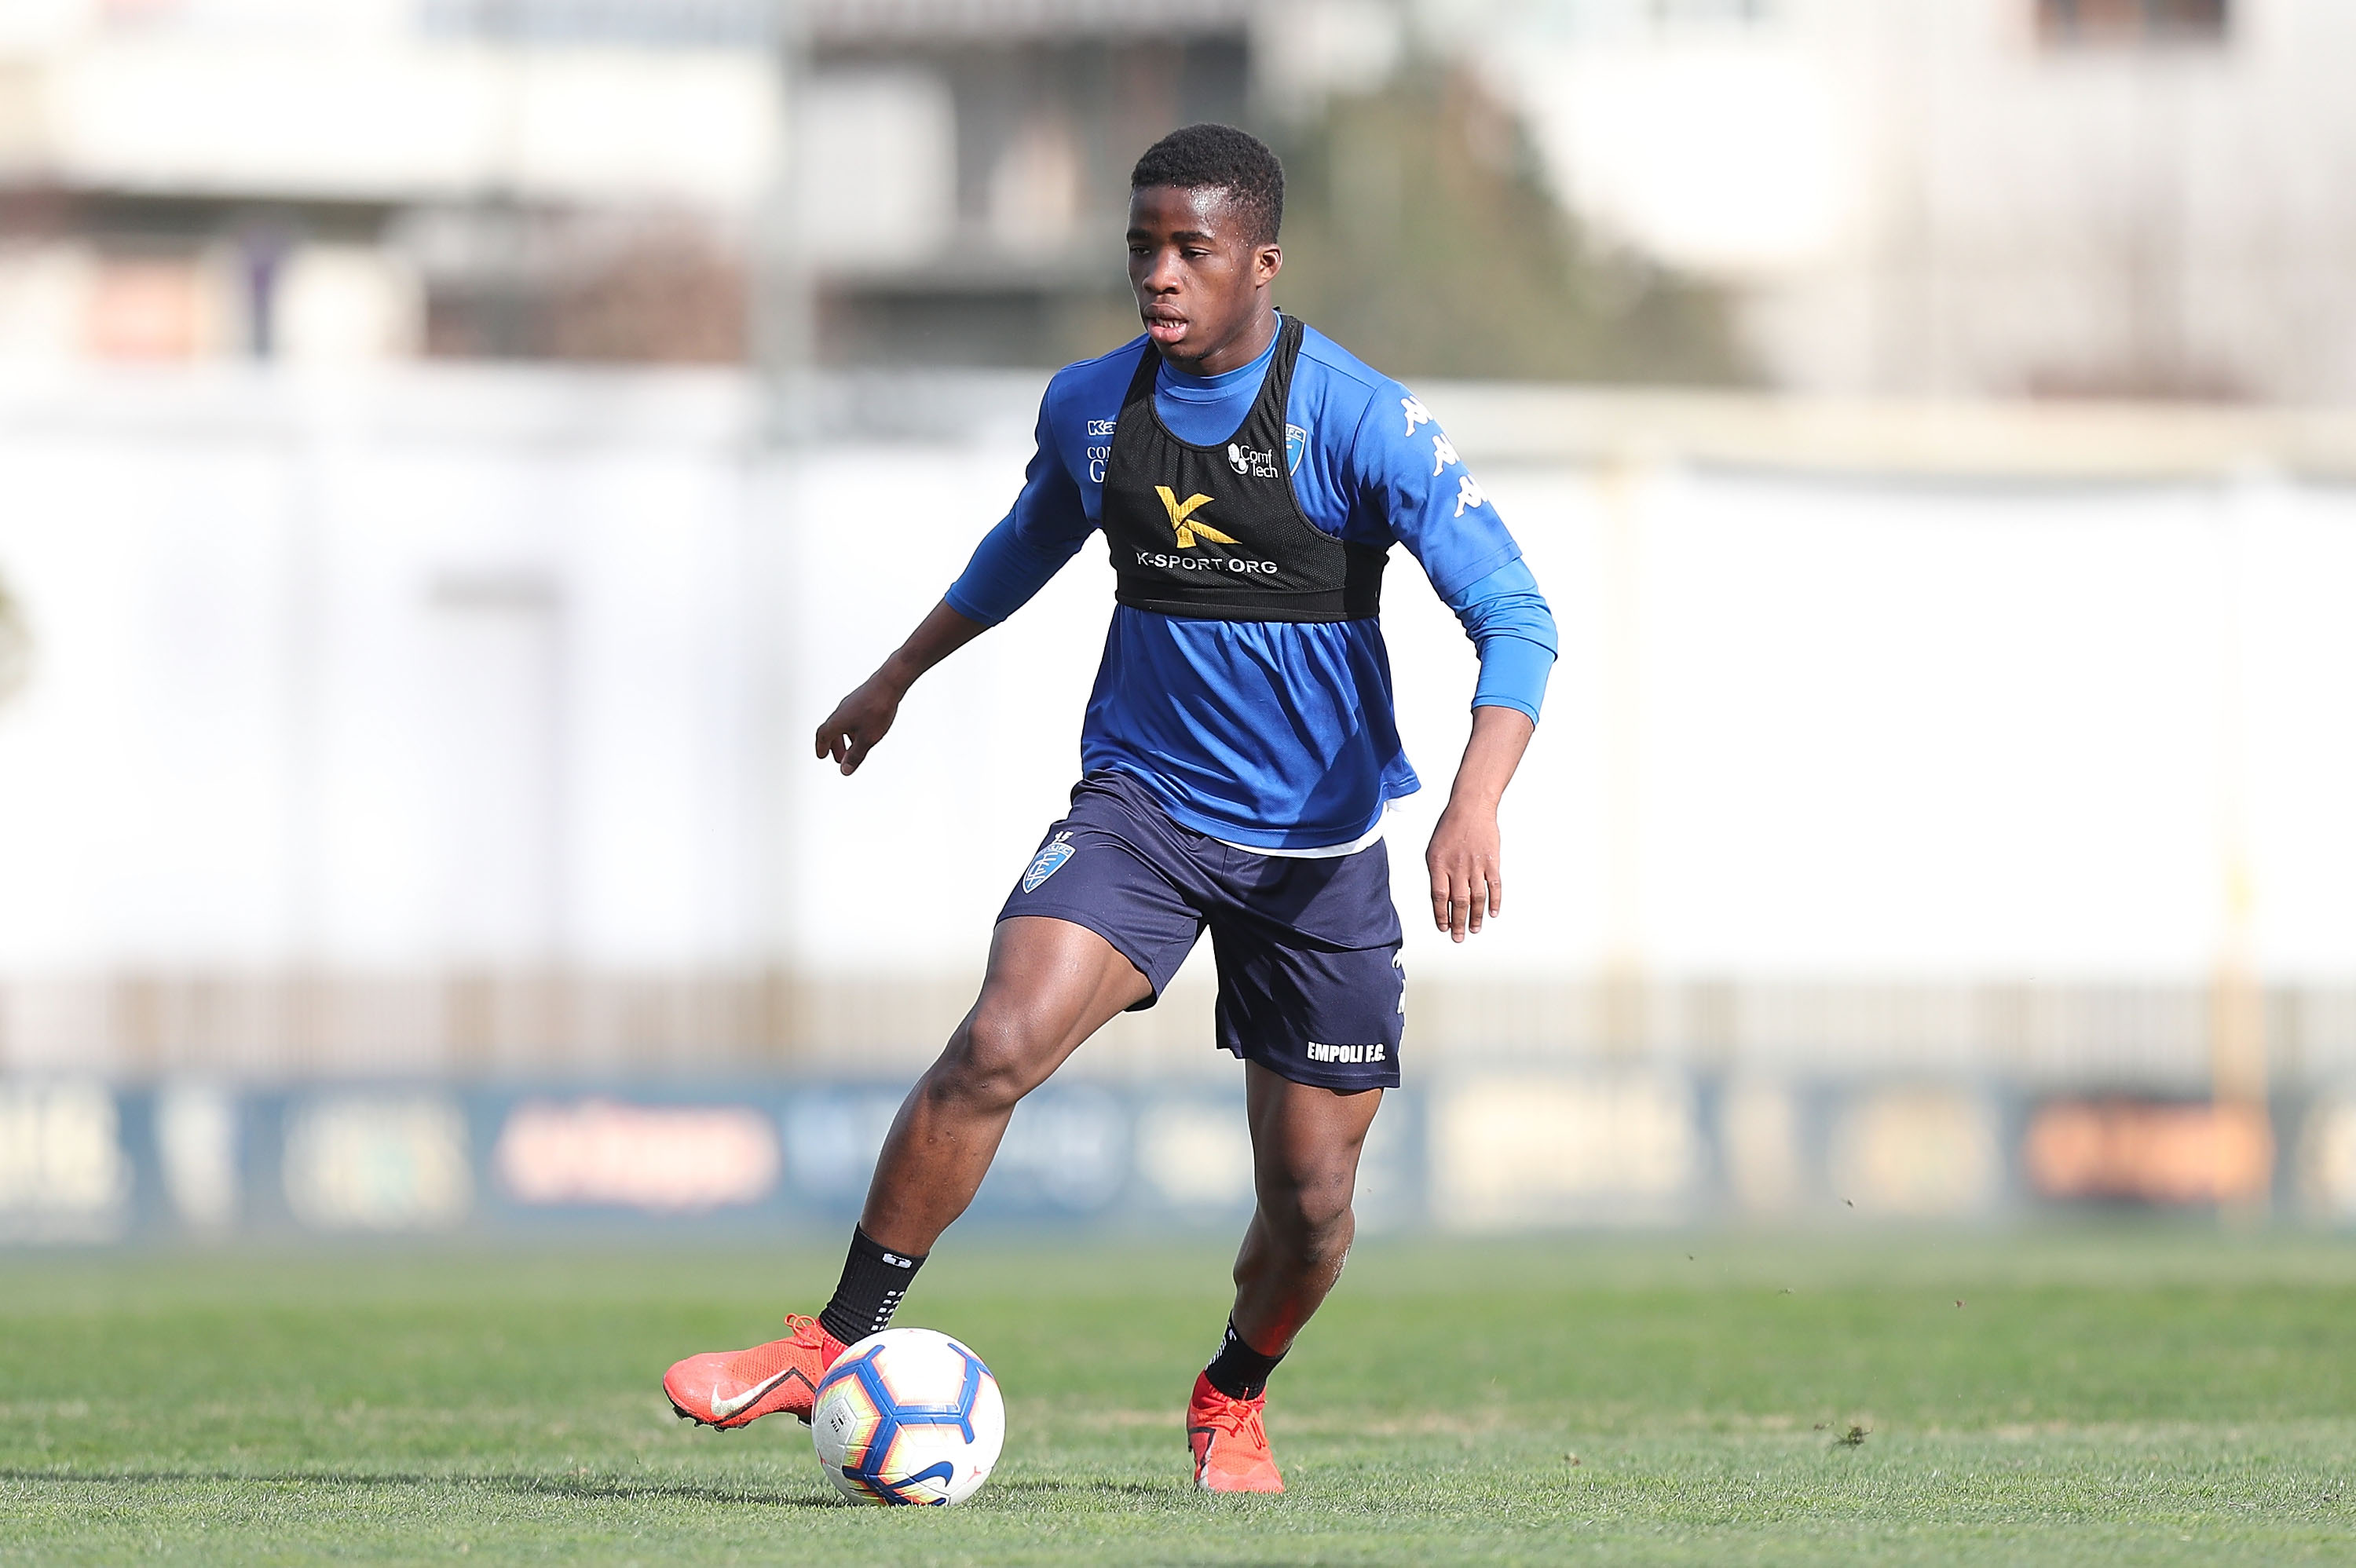 EMPOLI, ITALY - FEBRUARY 26: Hamed Junior Traorè of Empoli FC in action during training session on February 26, 2019 in Empoli, Italy.  (Photo by Gabriele Maltinti/Getty Images)